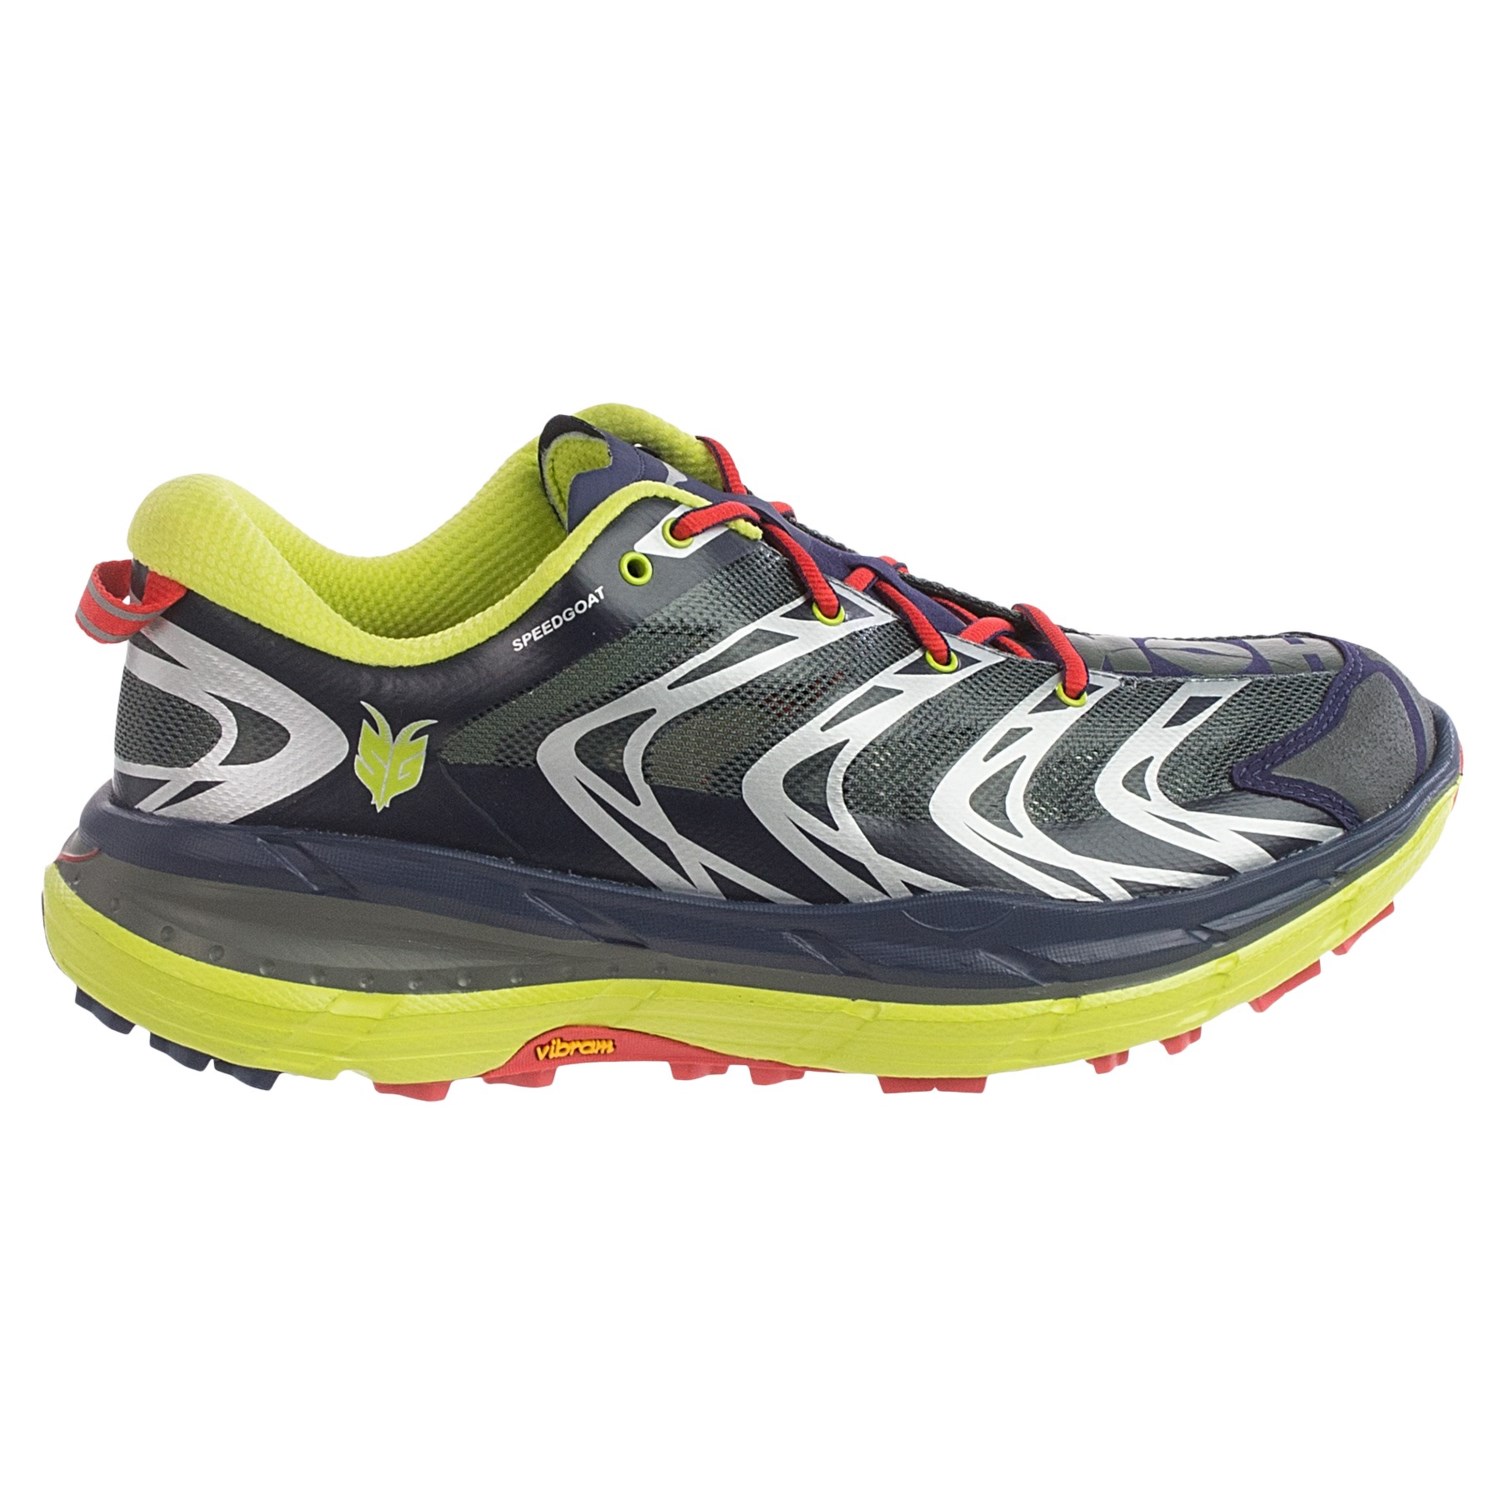 Hoka One One Speedgoat Trail Running Shoes (For Men) - Save 50%